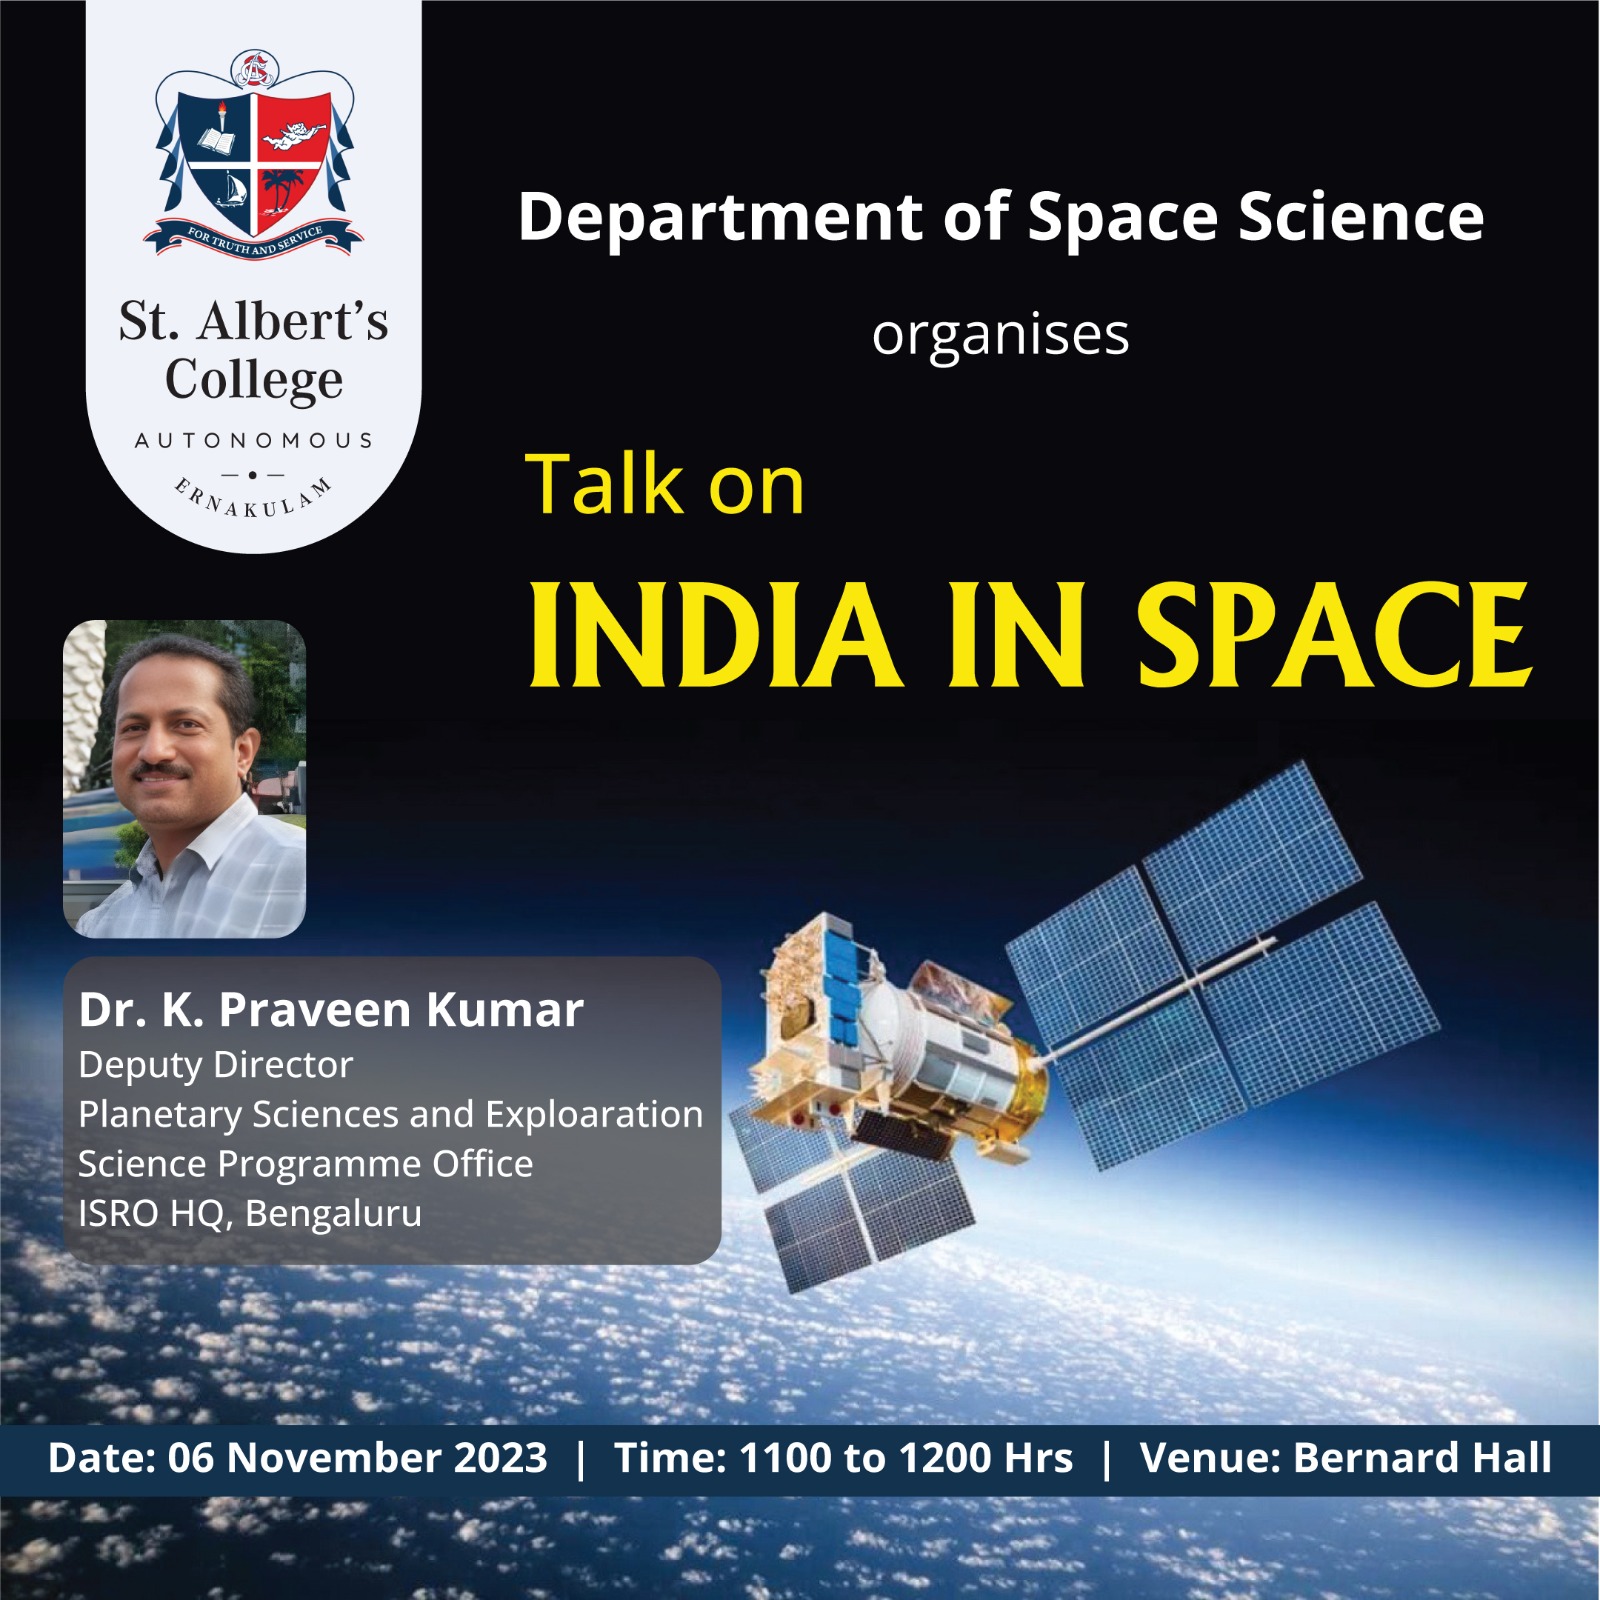 Talk on INDIA IN SPACE